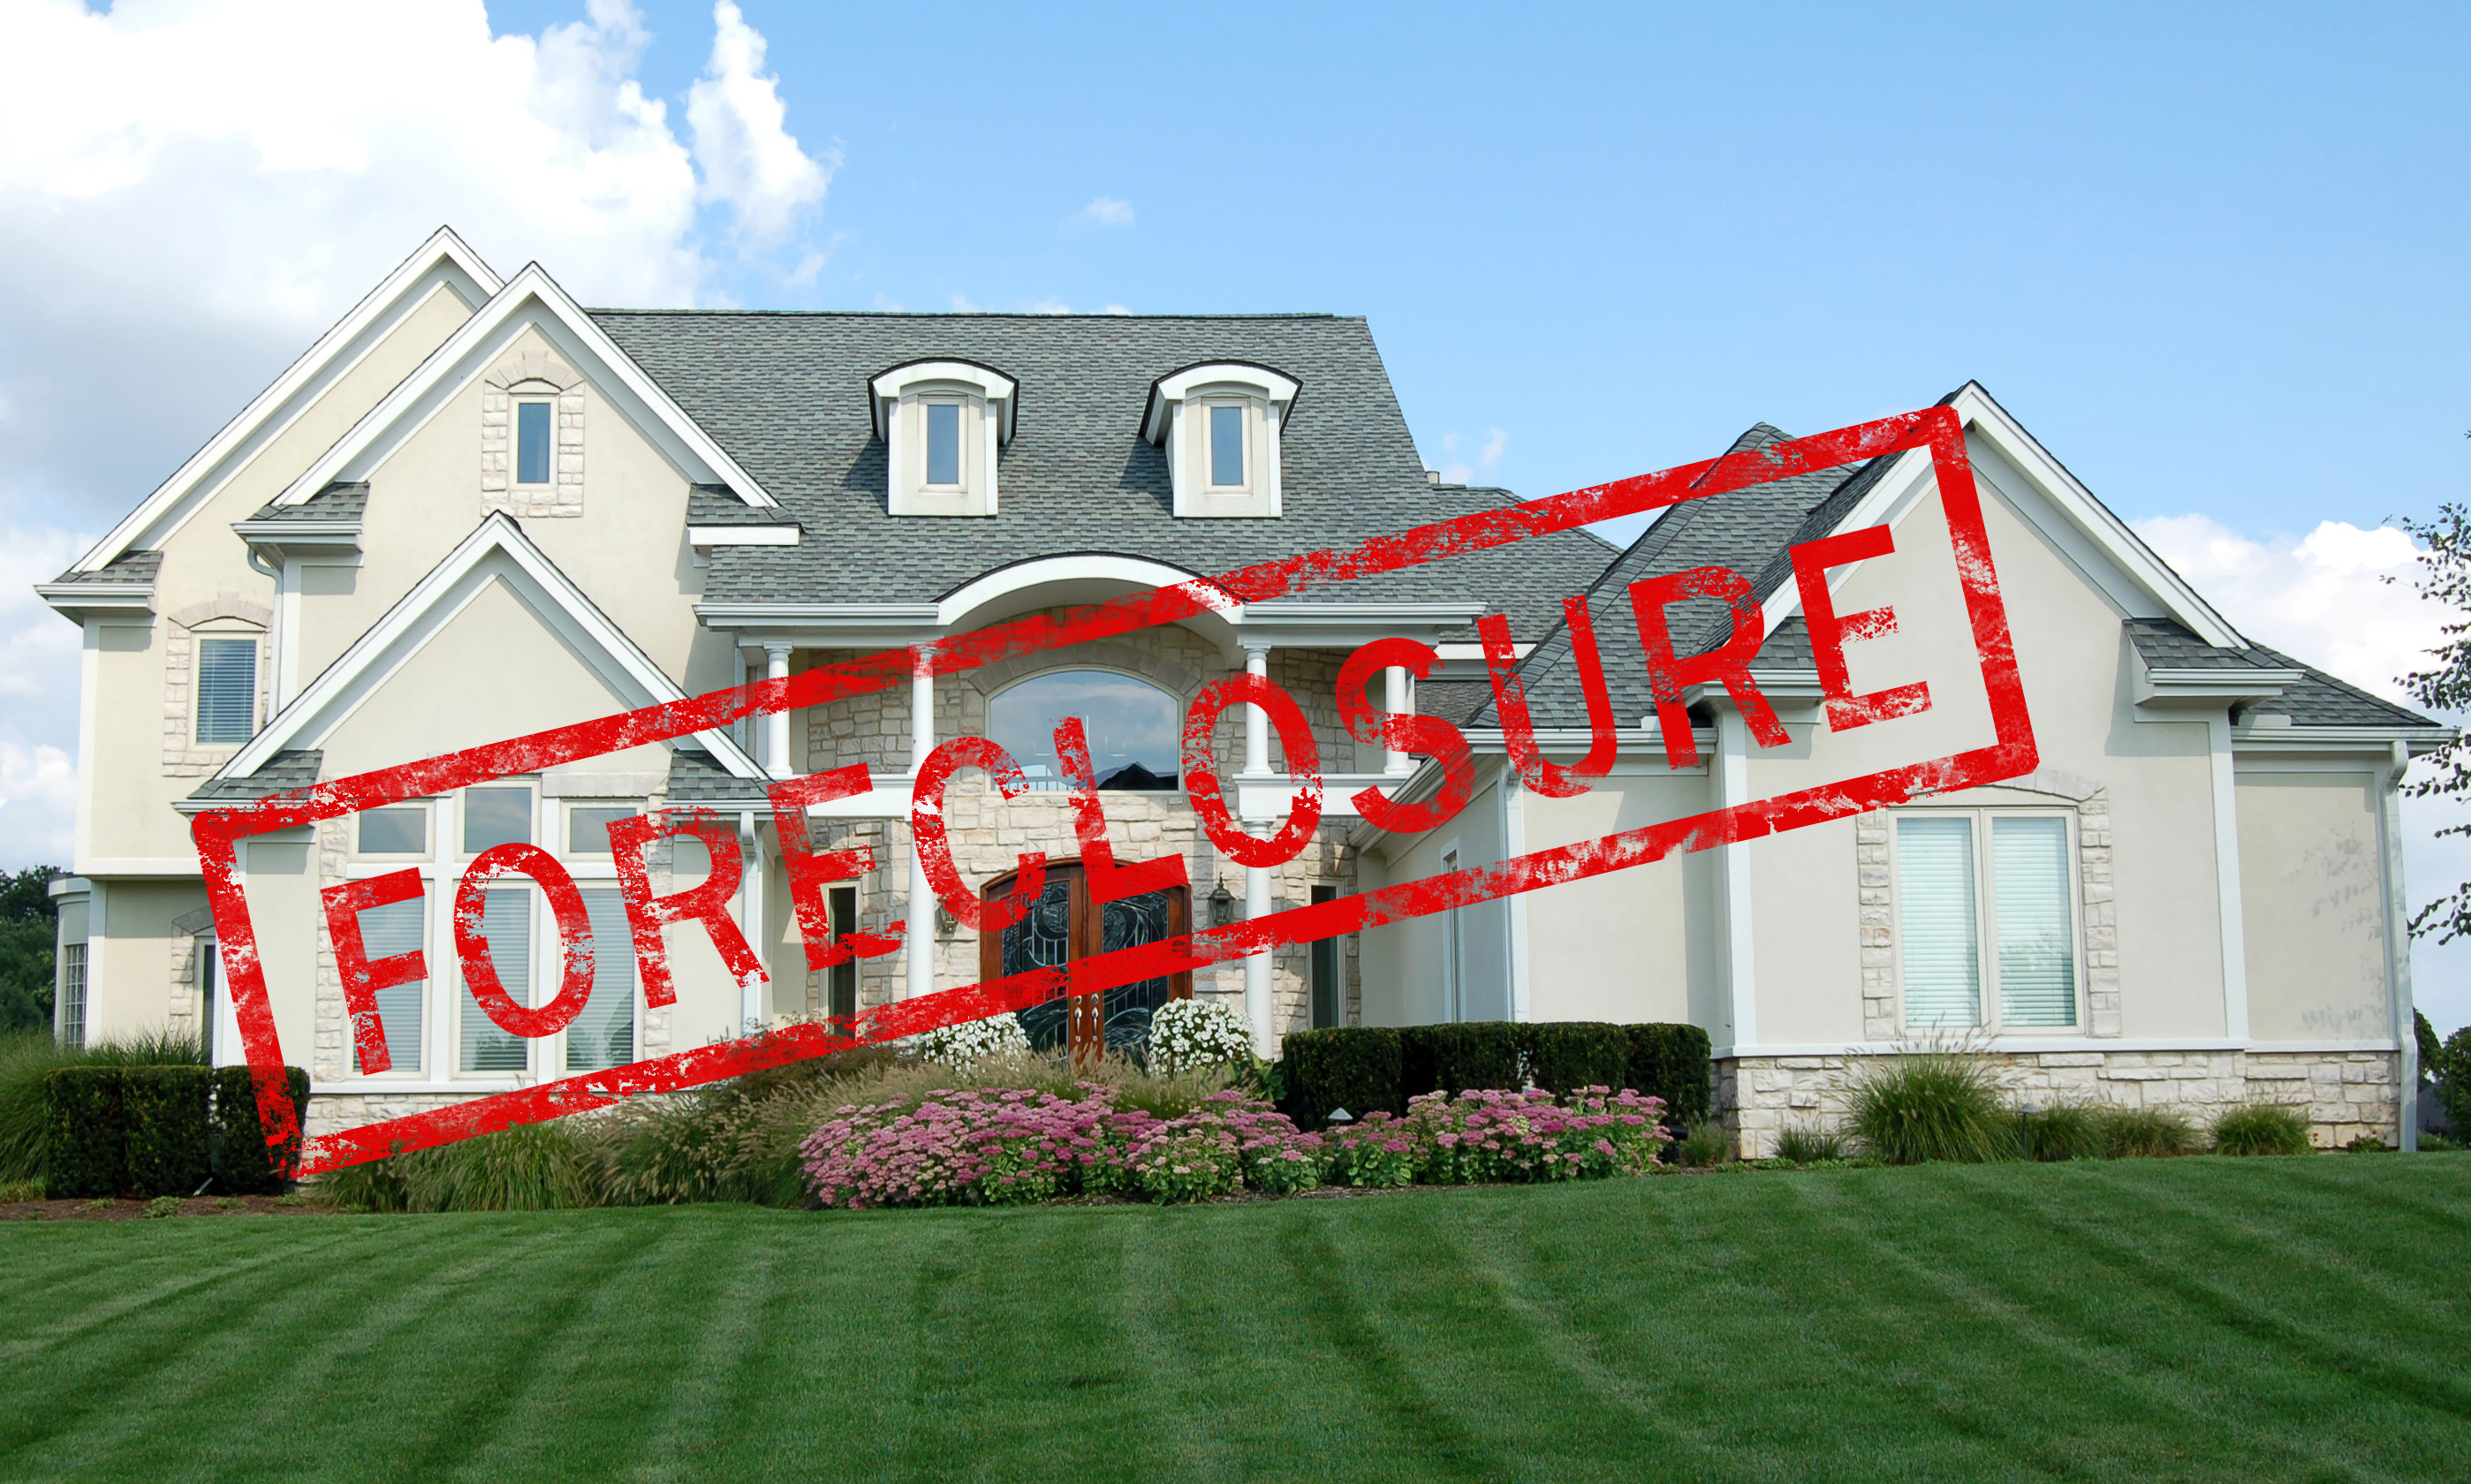 Call West Valley Appraisal Services when you need valuations regarding Maricopa foreclosures